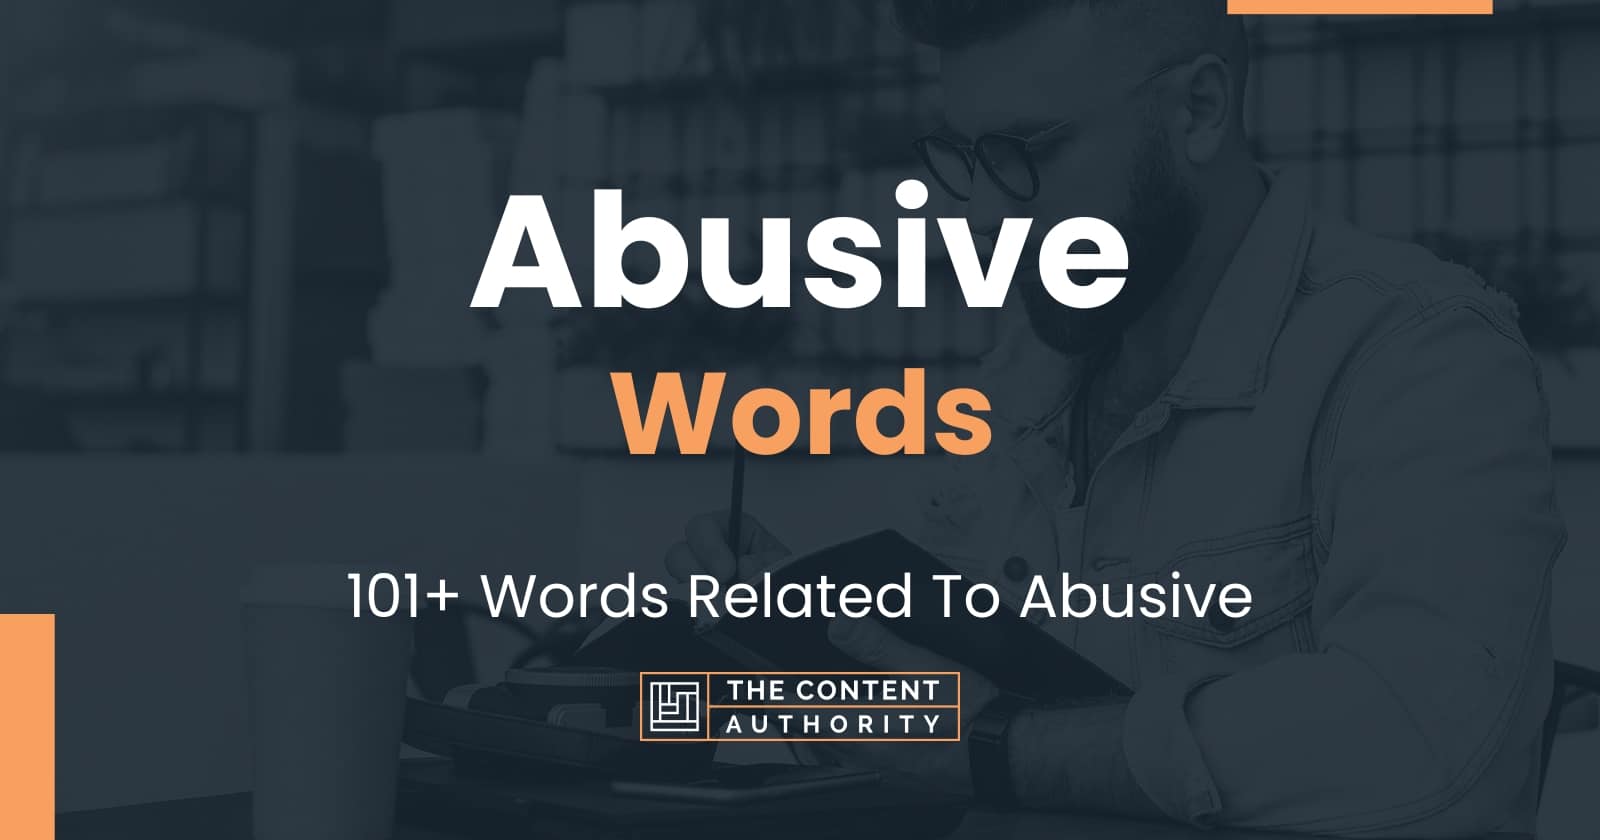 Abusive Words 101 Words Related To Abusive 